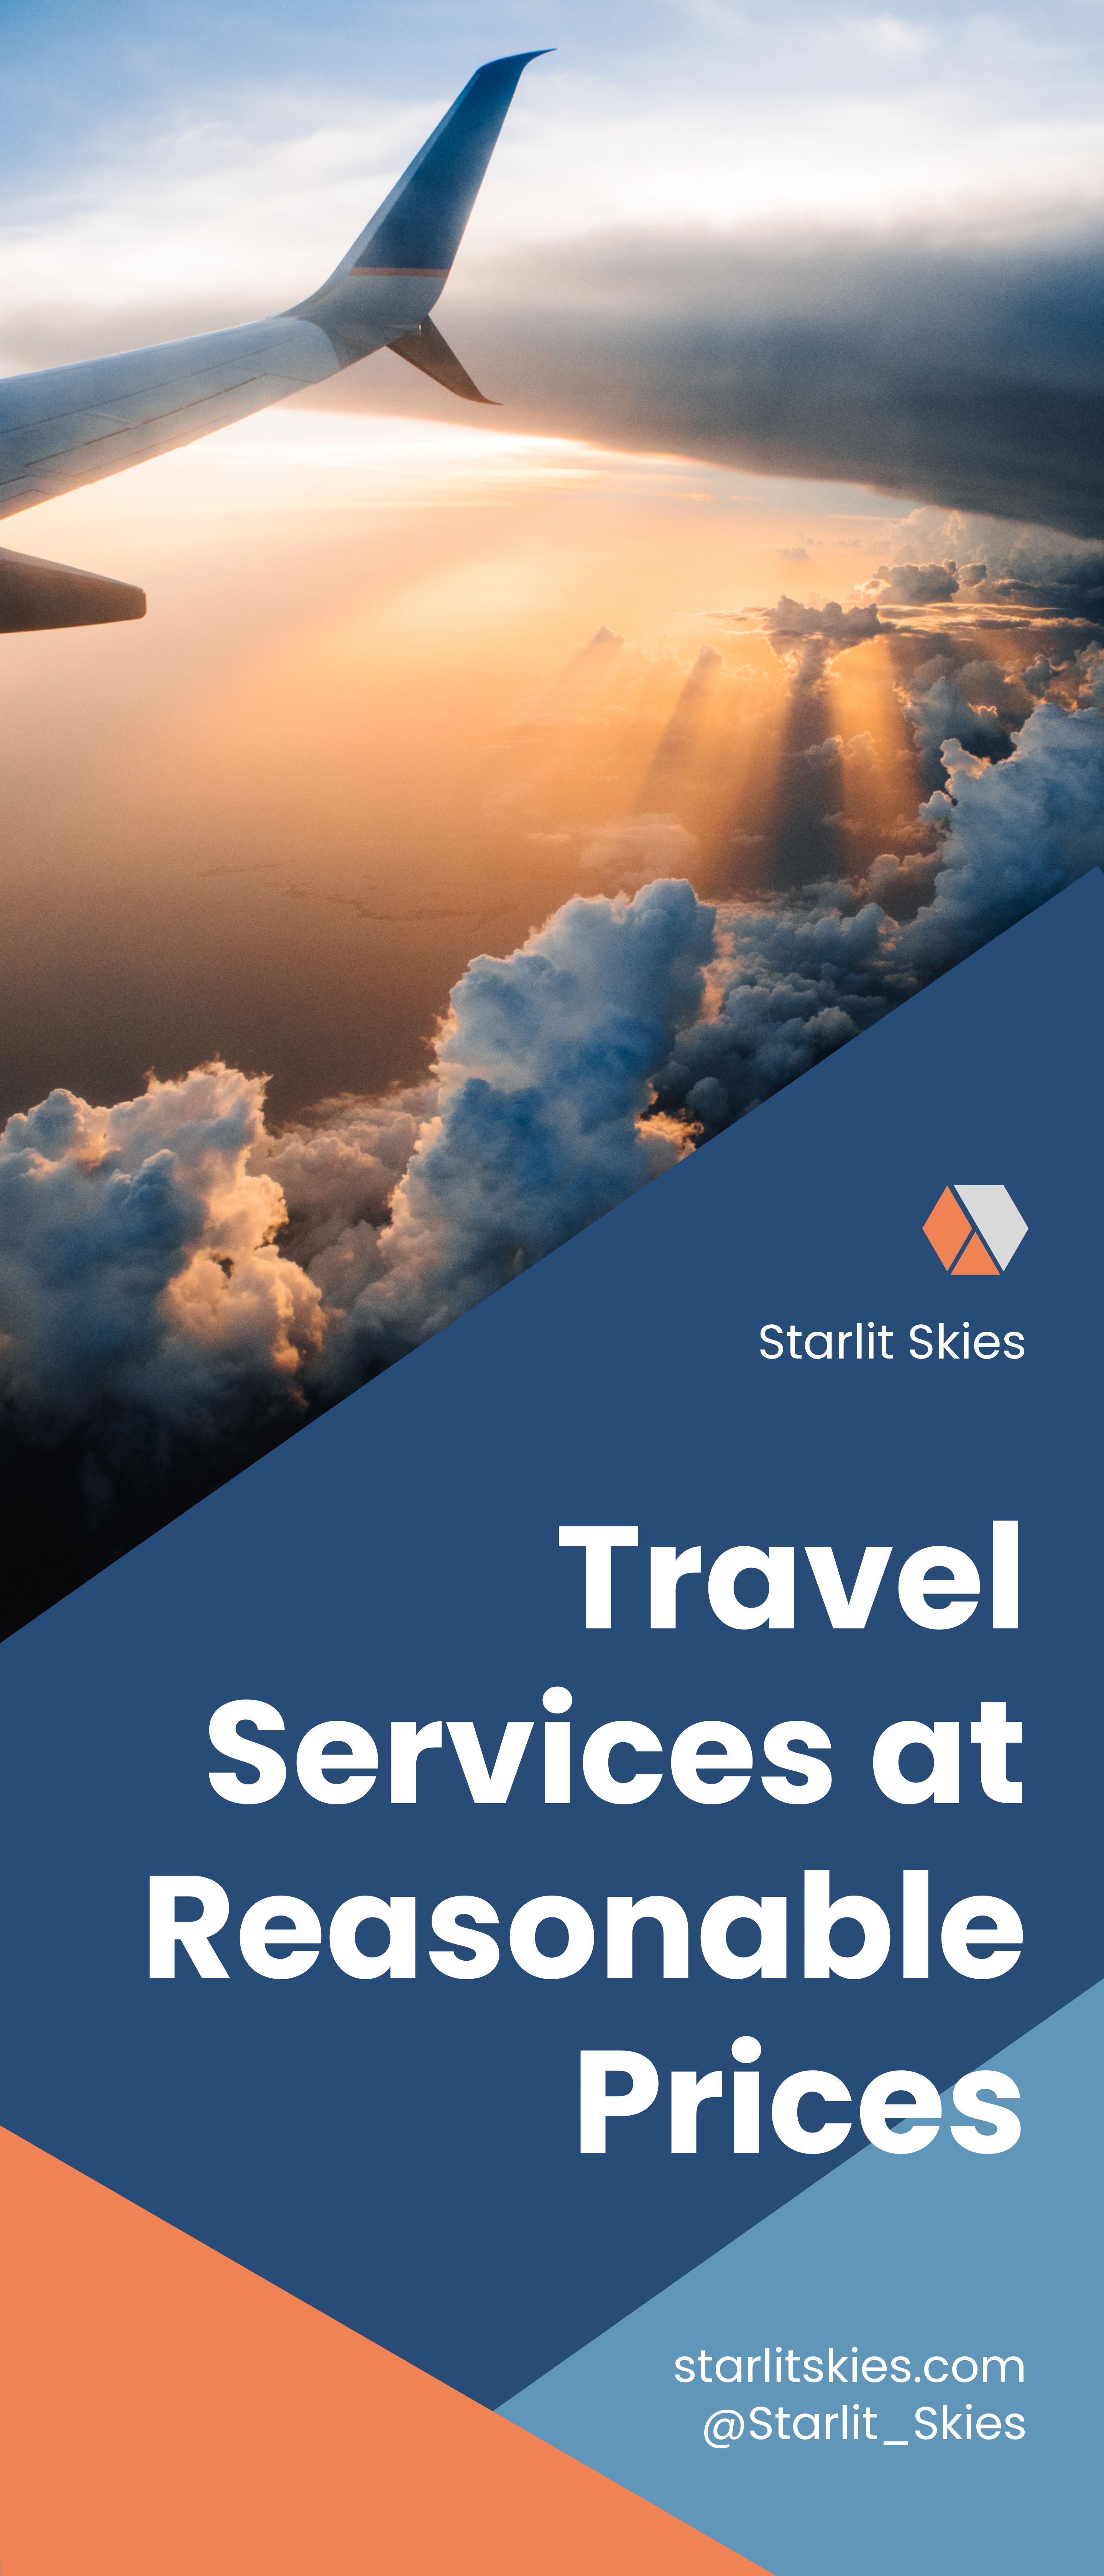 free-travel-services-roll-up-banner-template